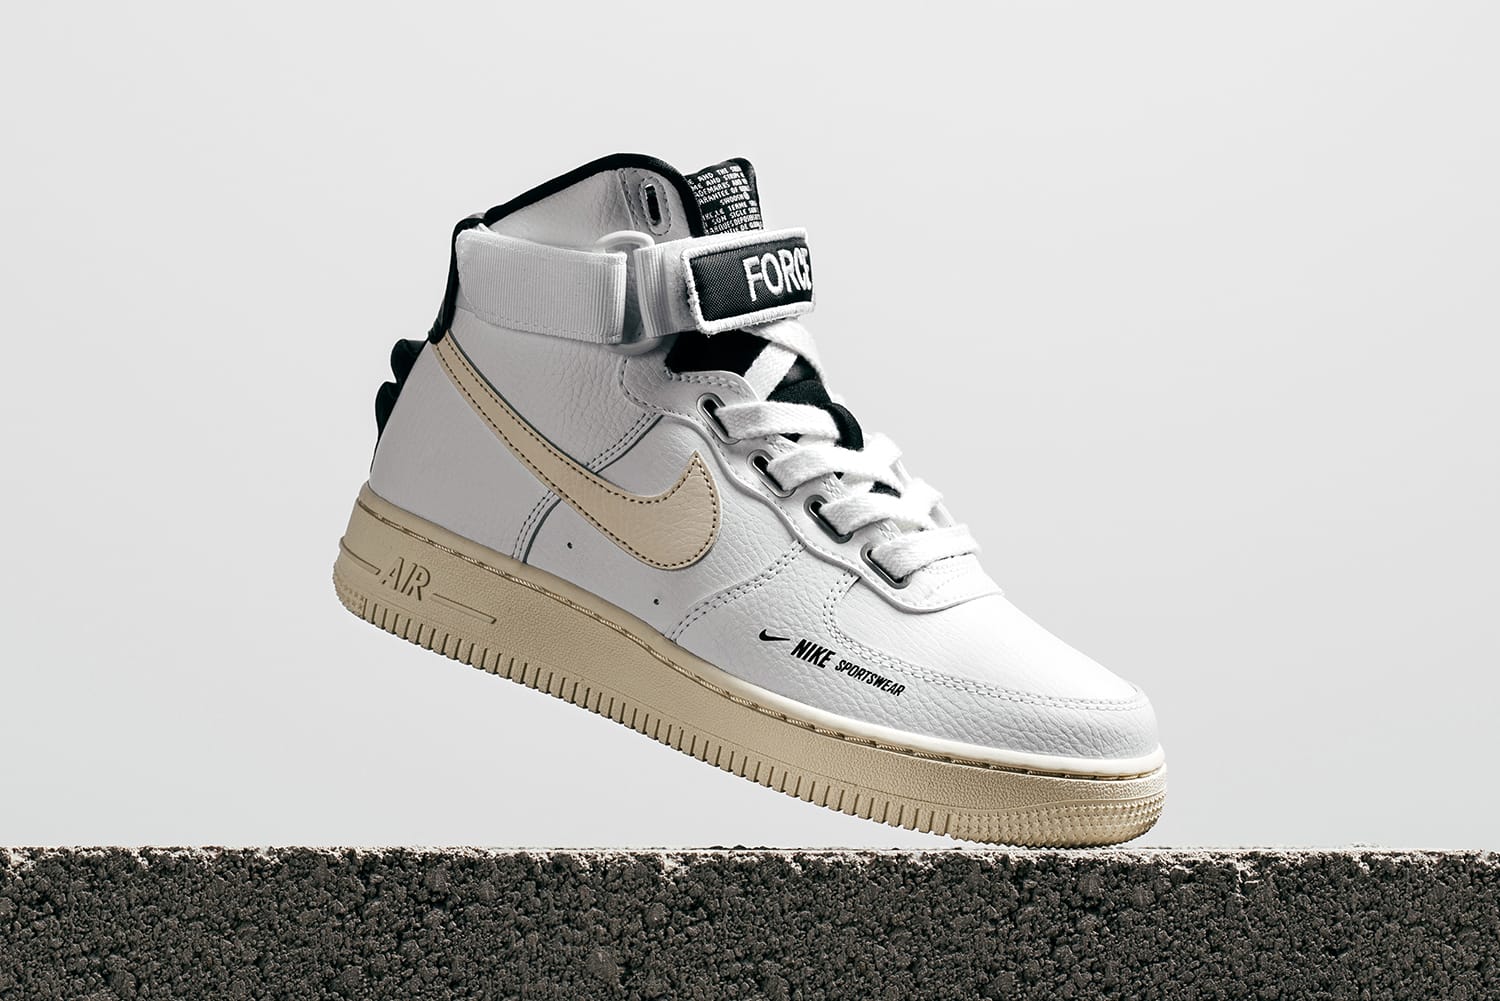 white air force 1 for girls